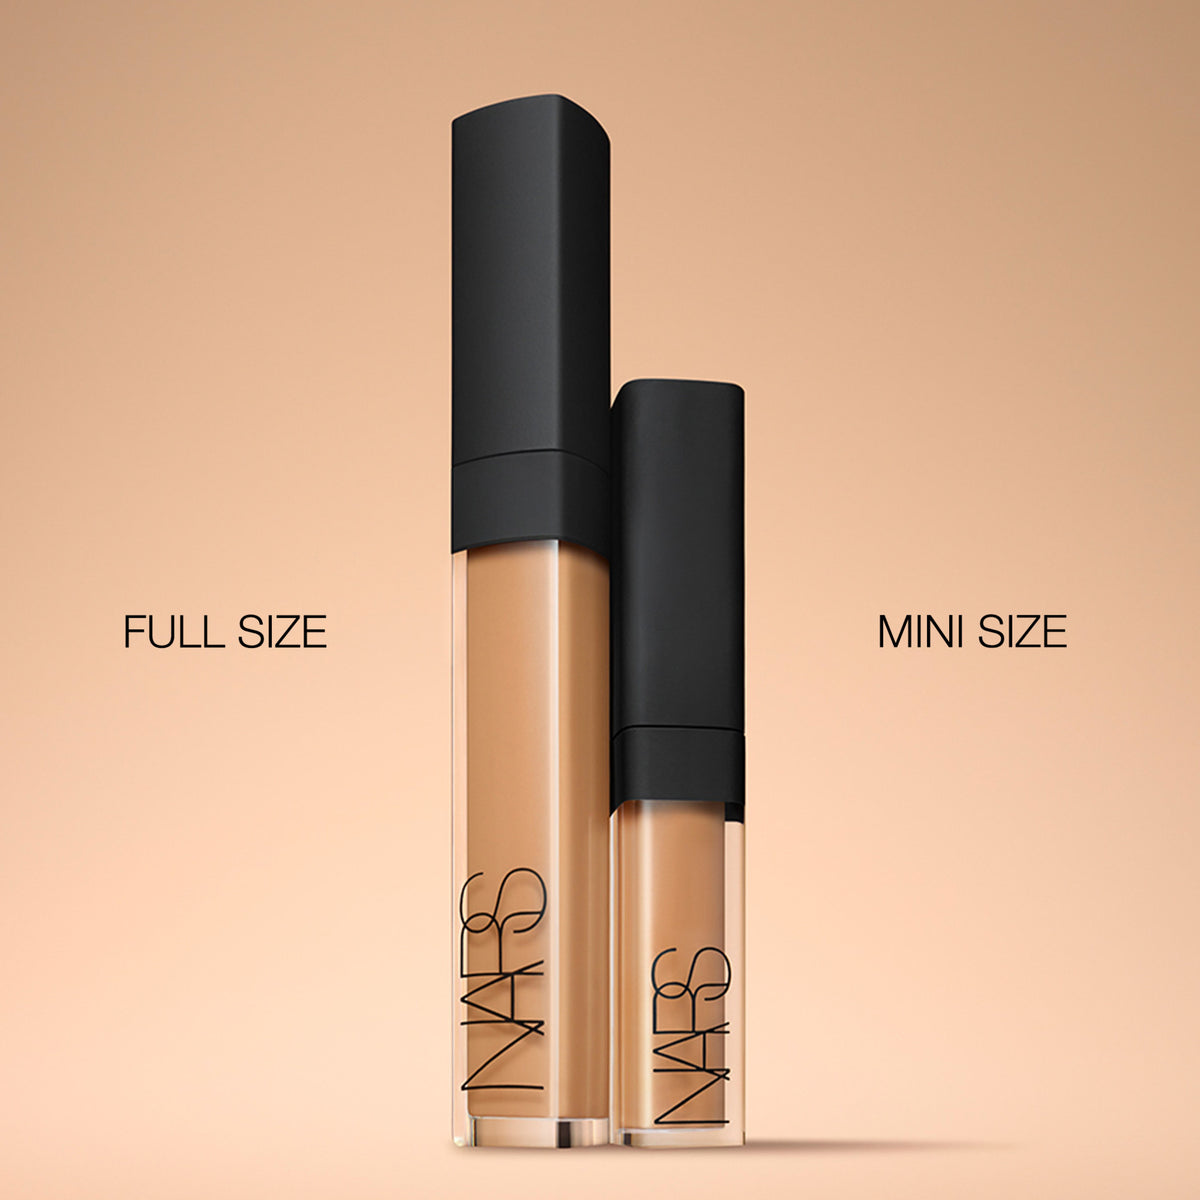 Nars Radiant Creamy Concealer . This product is for deep warm complexions